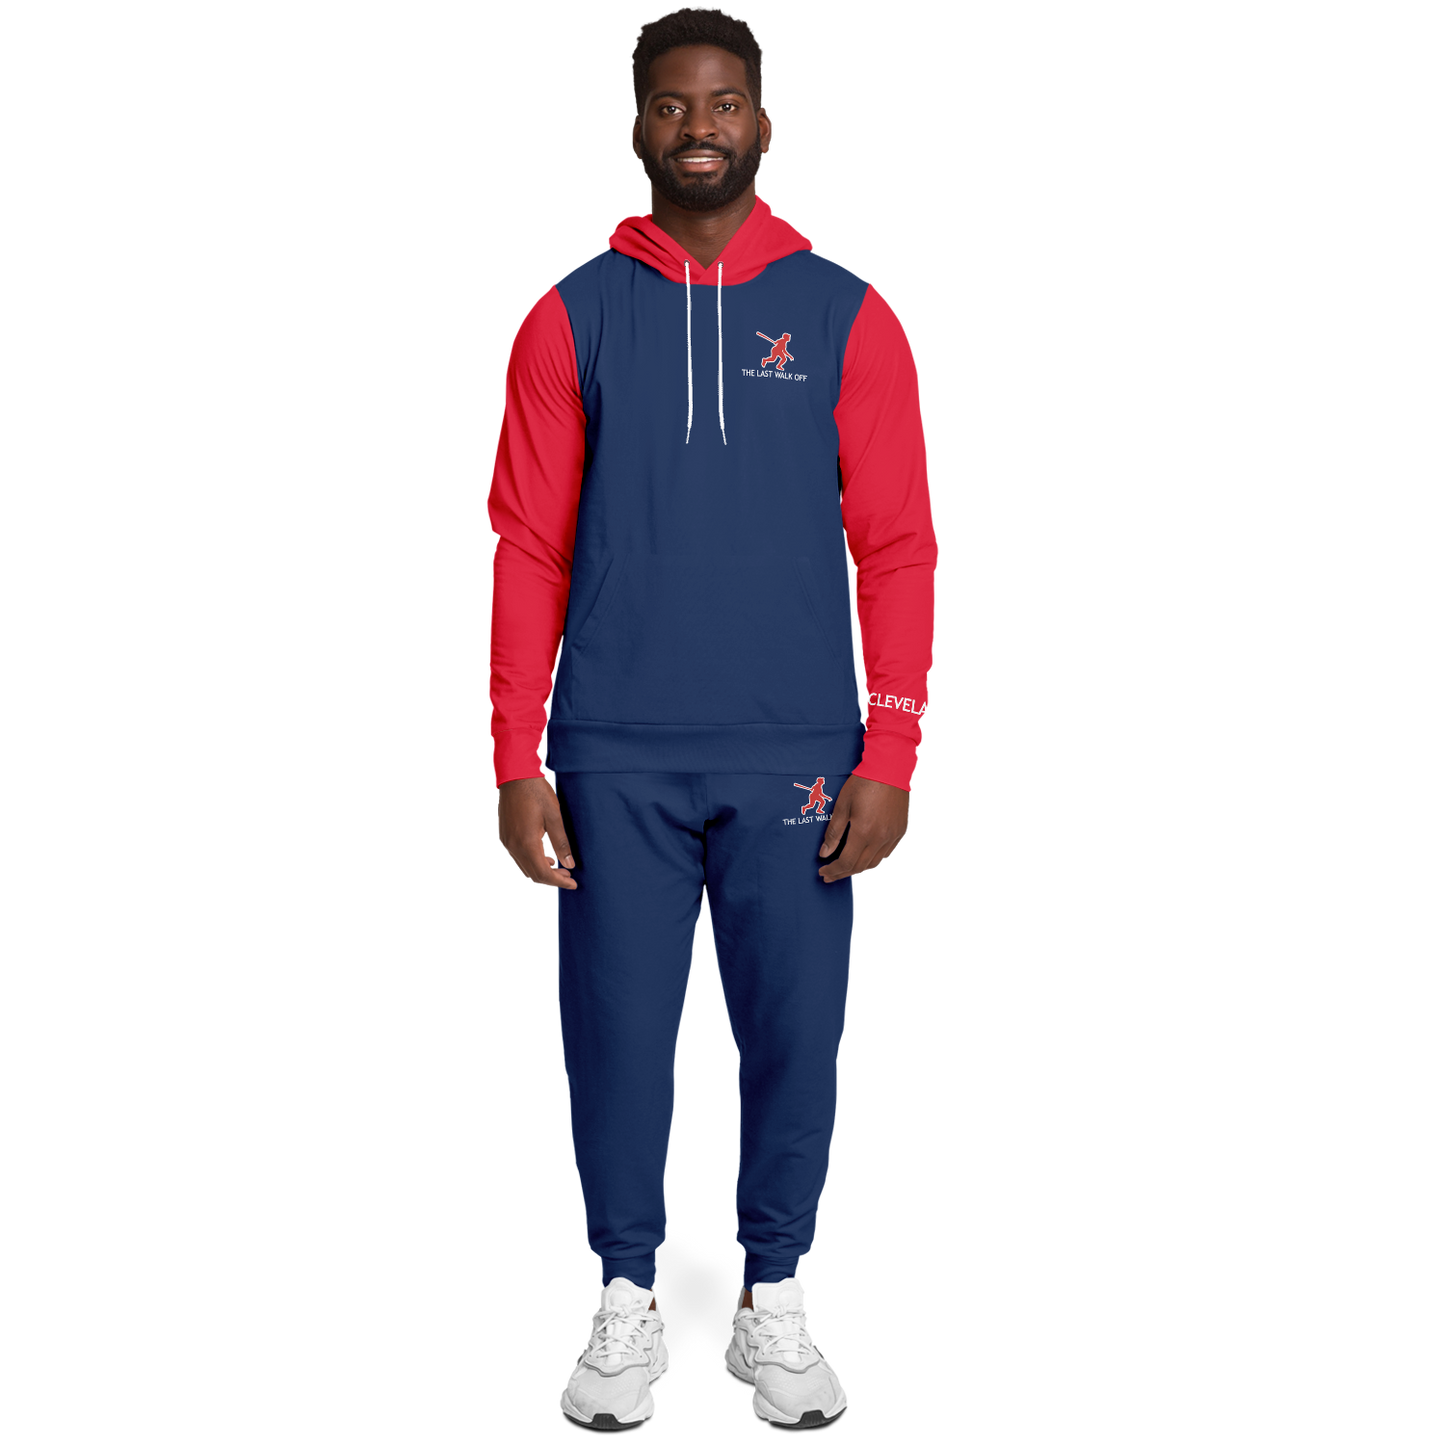 Cleveland Navy Blue Red Hoodie and Joggers